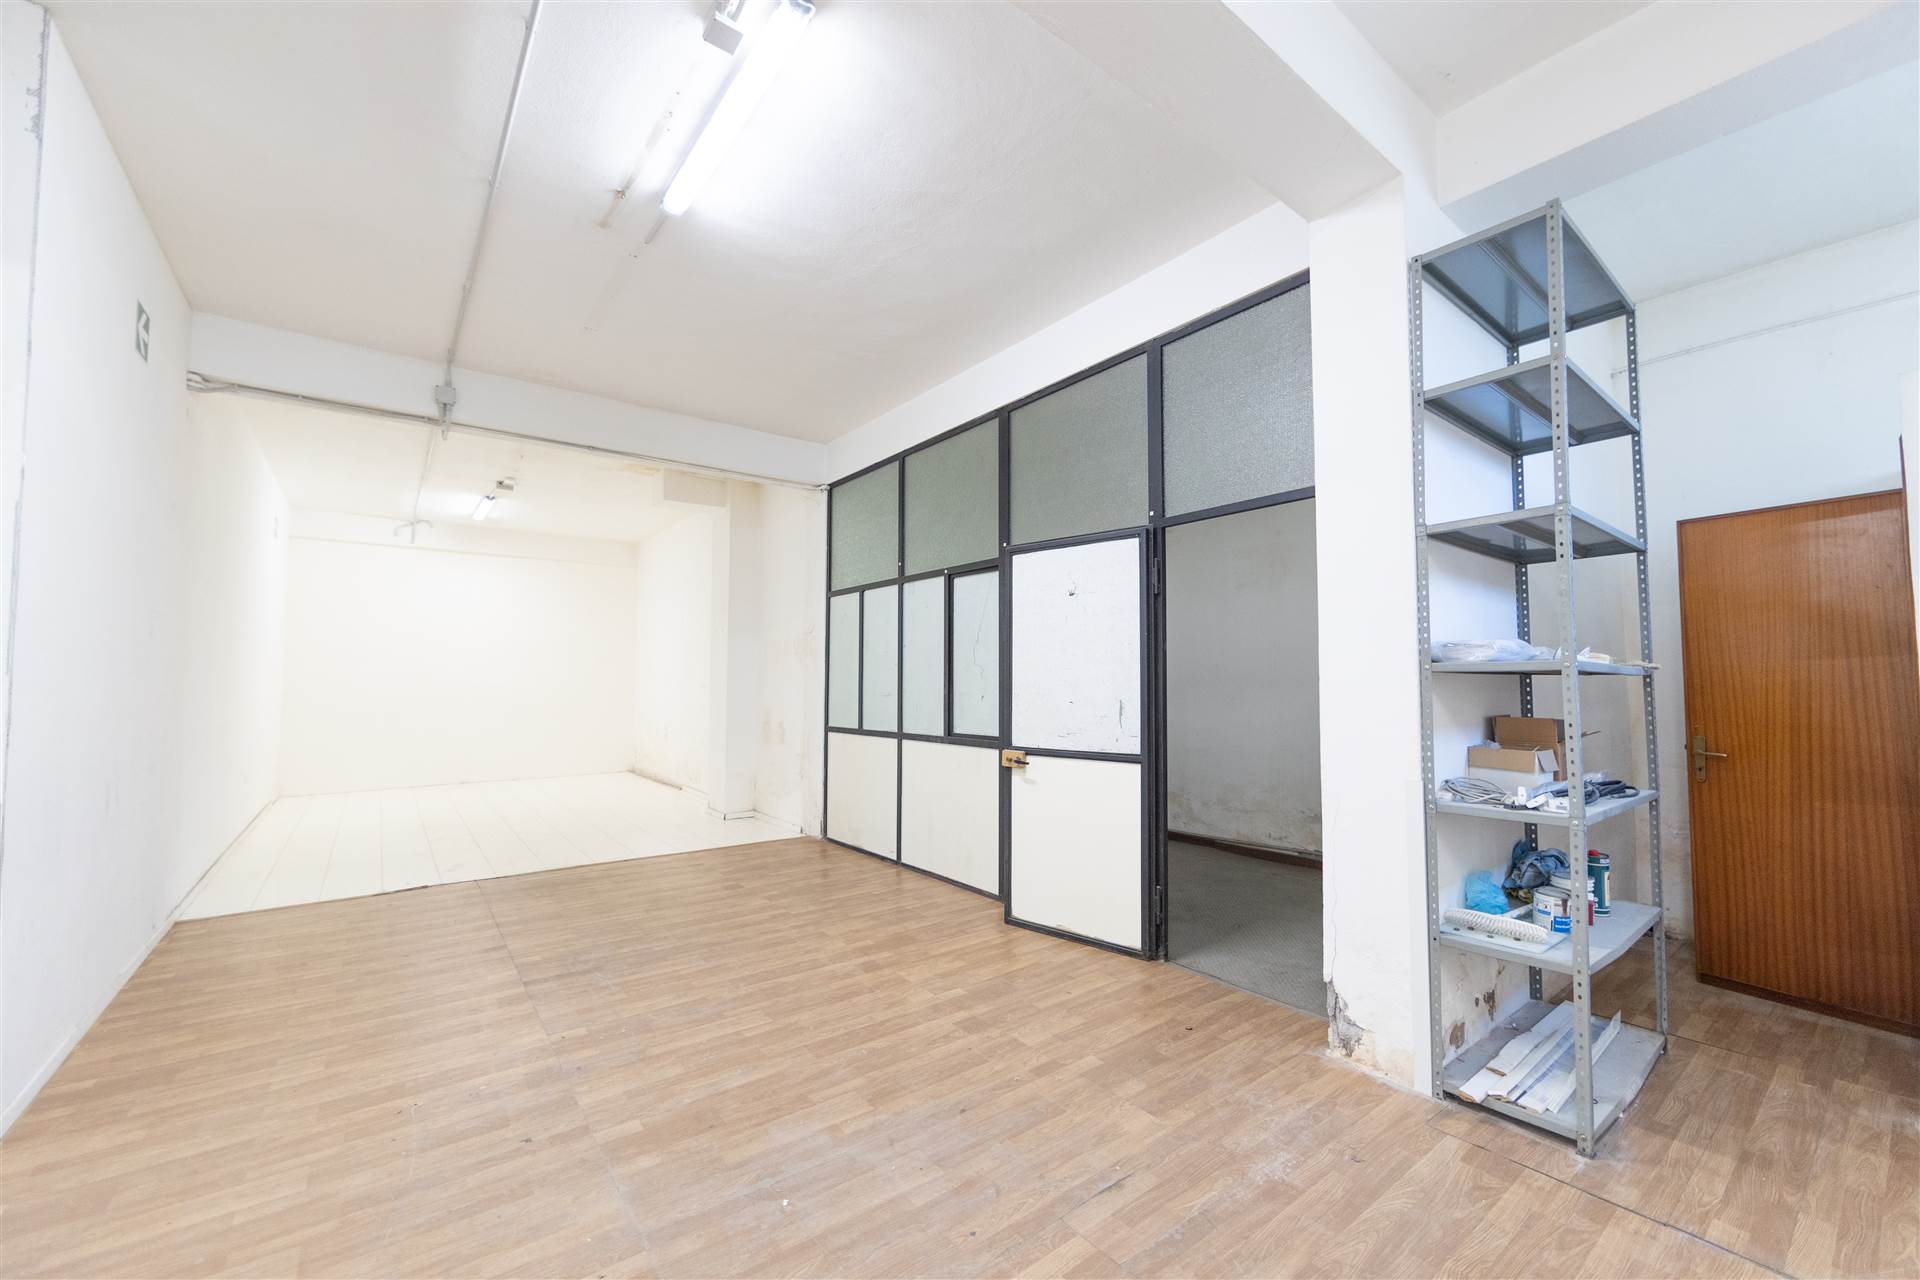 VALVERDE, Warehouse for sale of 81 Sq. mt., Good condition, Heating Non-existent, Energetic class: Not subject, placed at Basement on 3, composed by: 